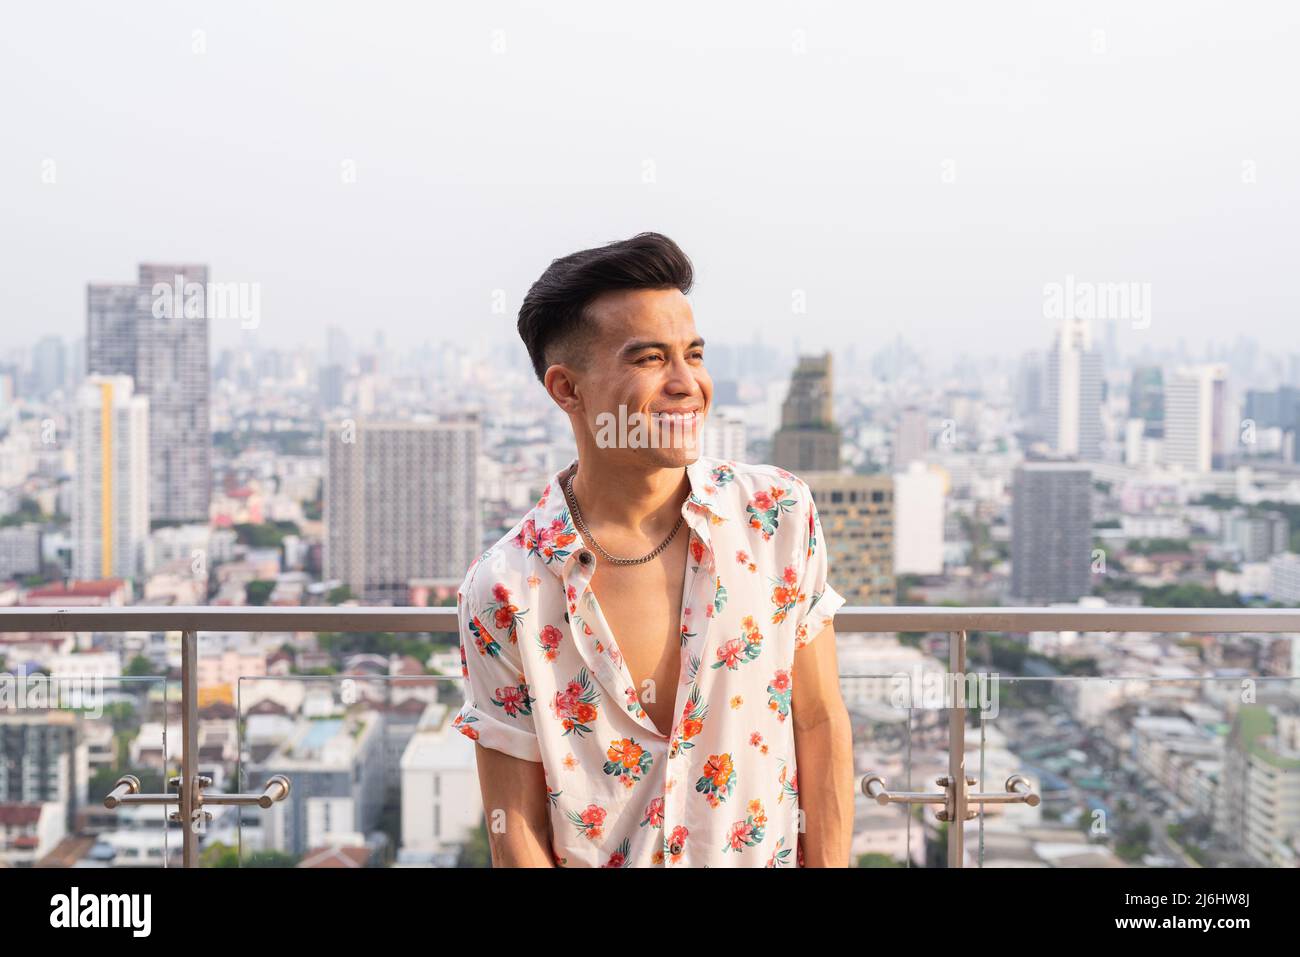 Portrait of handsome young cool stylish man during summer Stock Photo